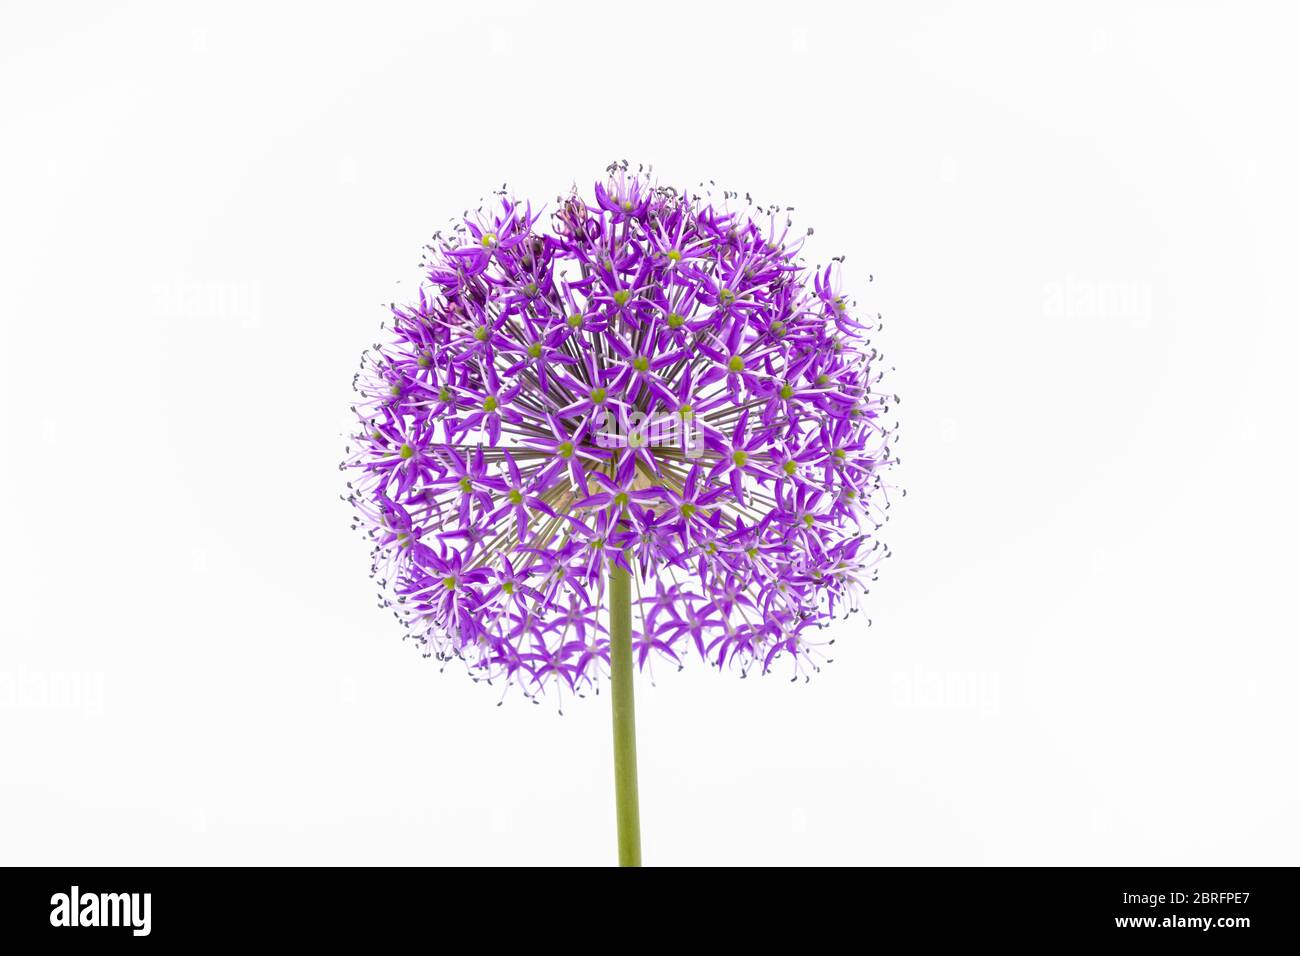 A single purple Allium flower close-up against a white background. The inflorescence comprises umbels Stock Photo